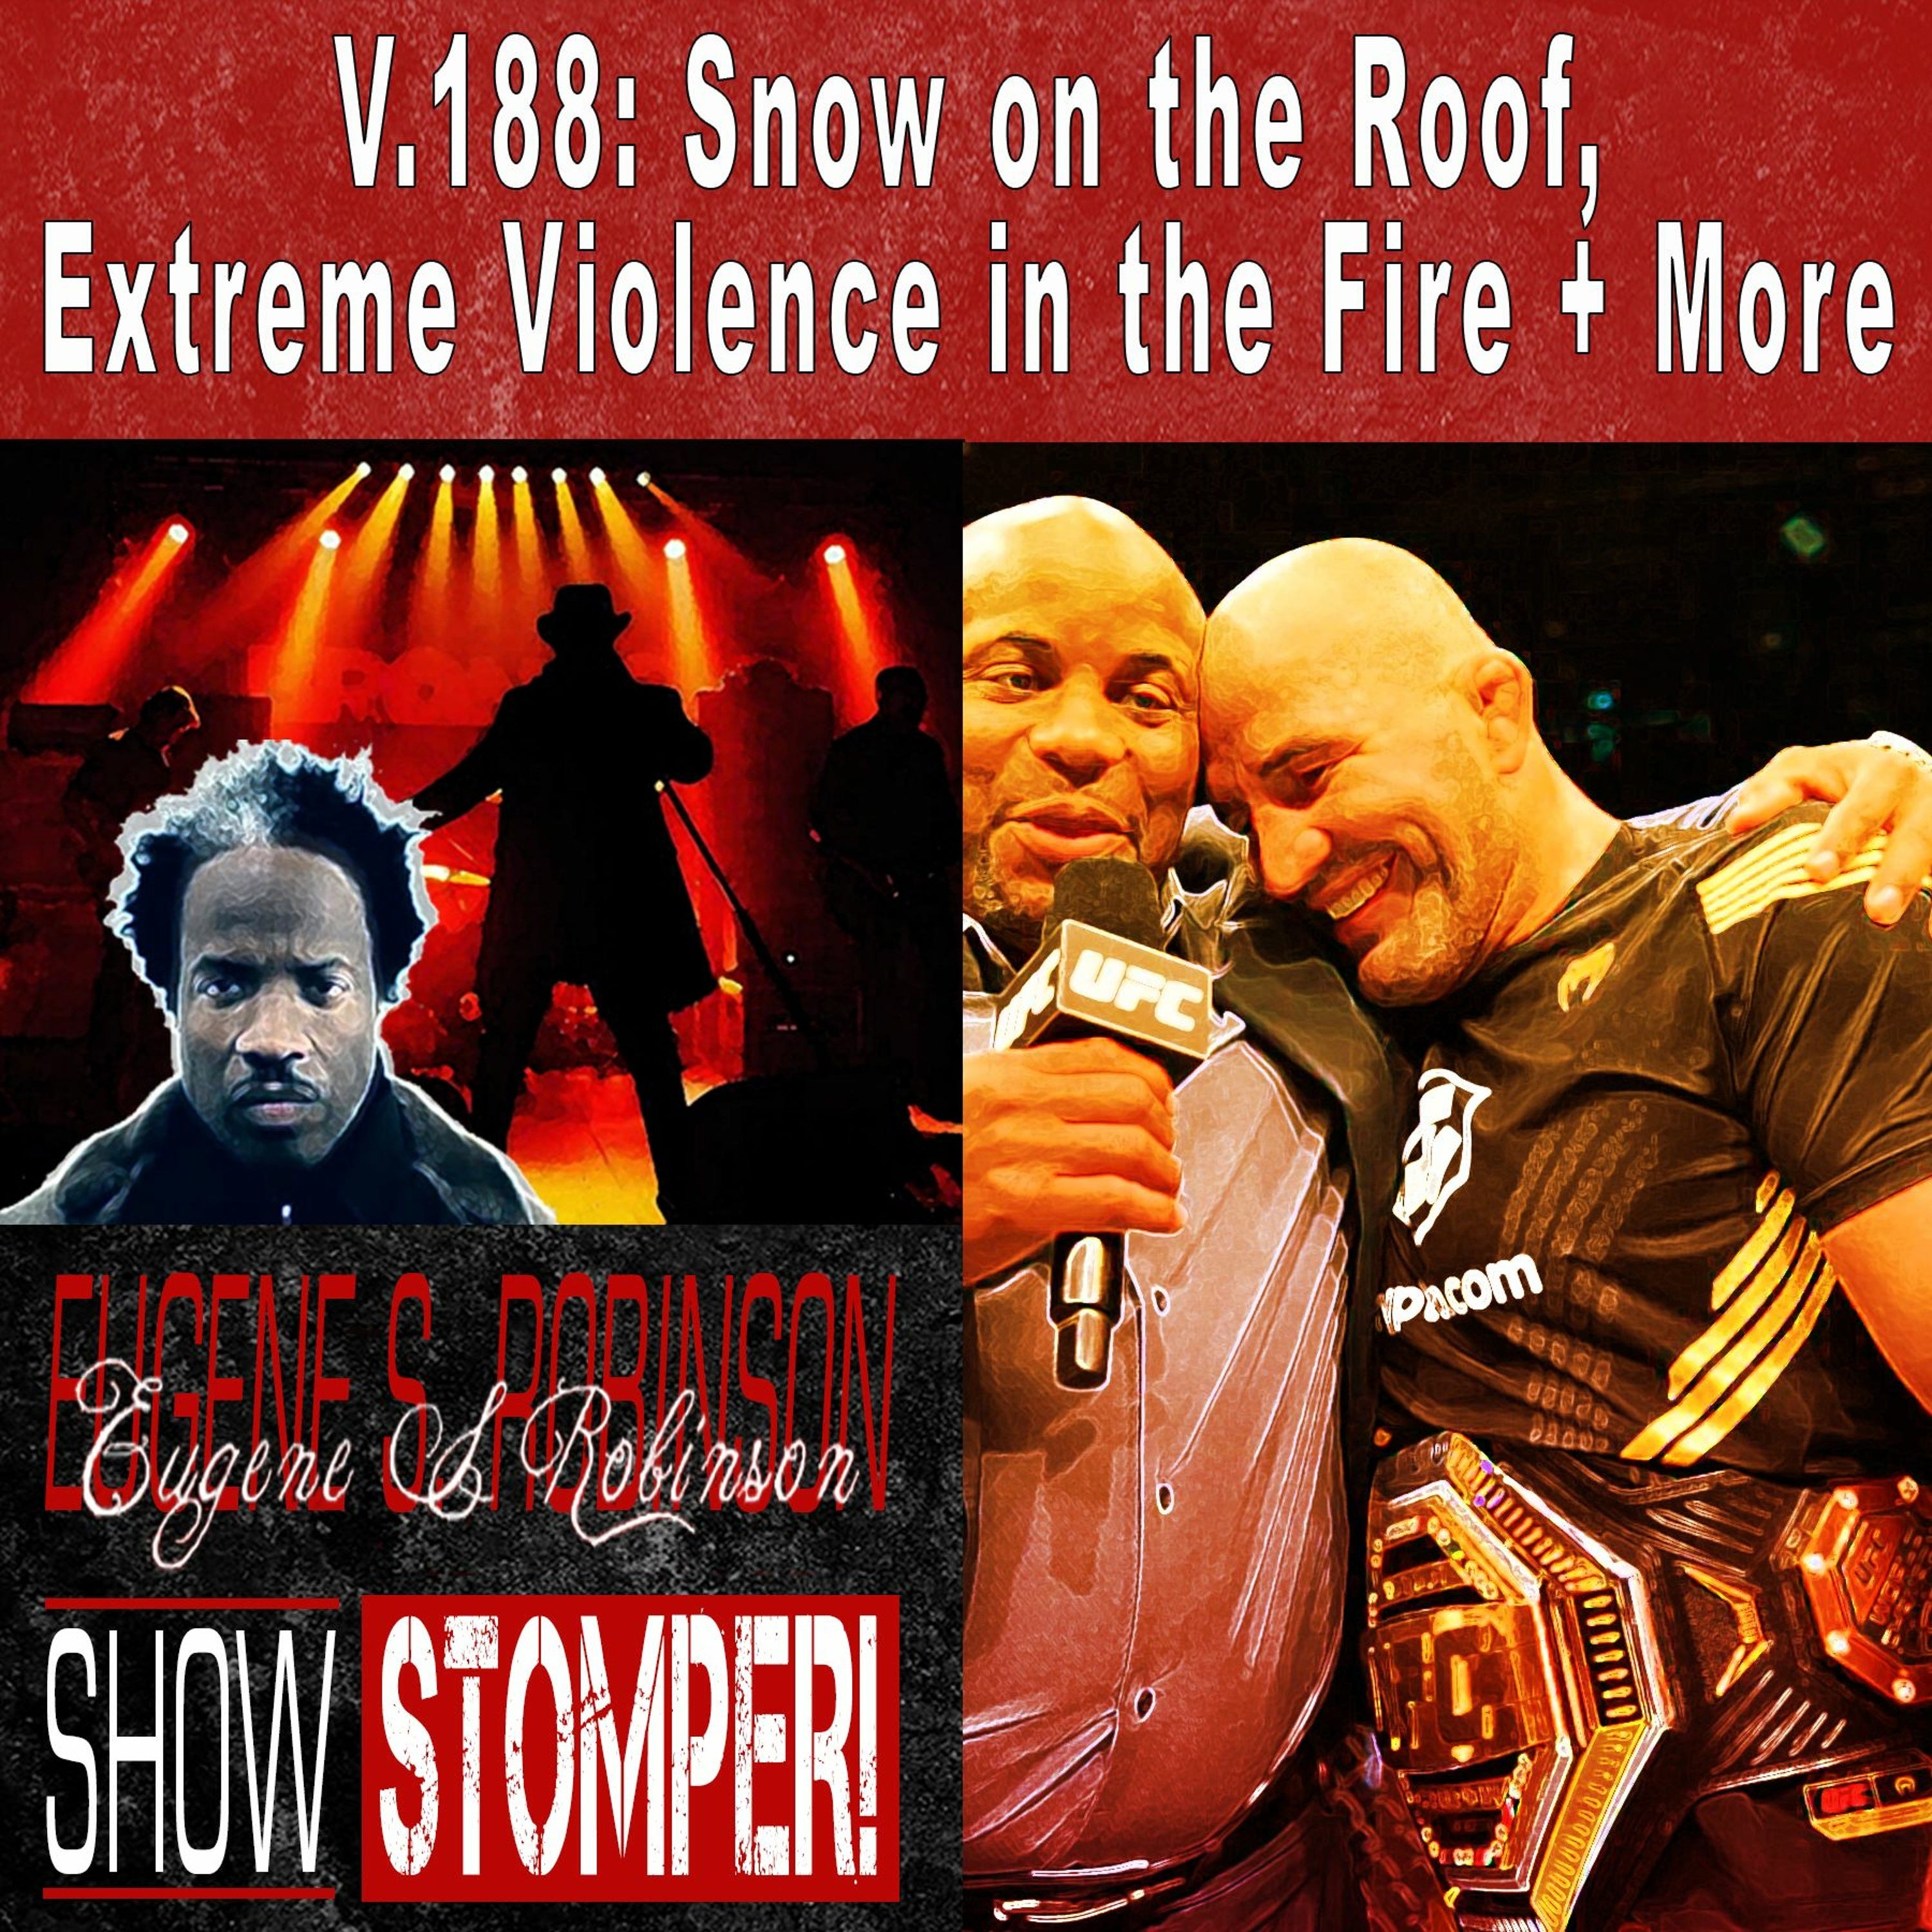 V.188: Snow on the Roof, Extreme Violence in the Fire + More On The Eugene S. Robinson Show Stomper!